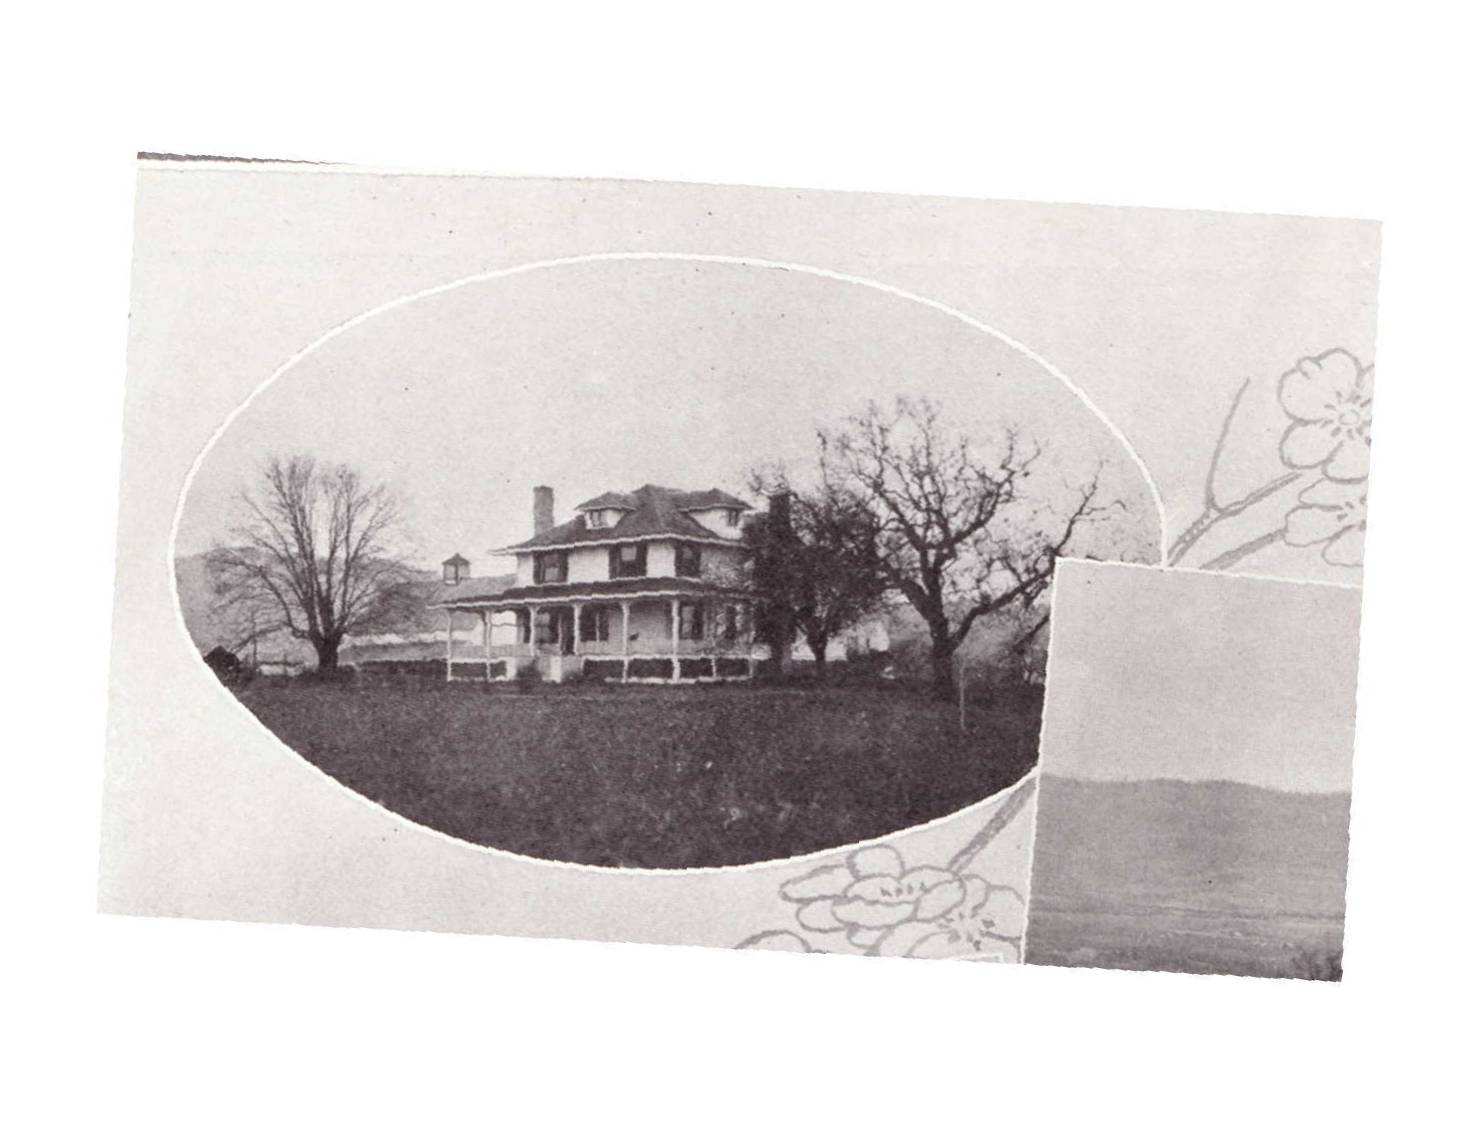 historic photograph of a home from a distance